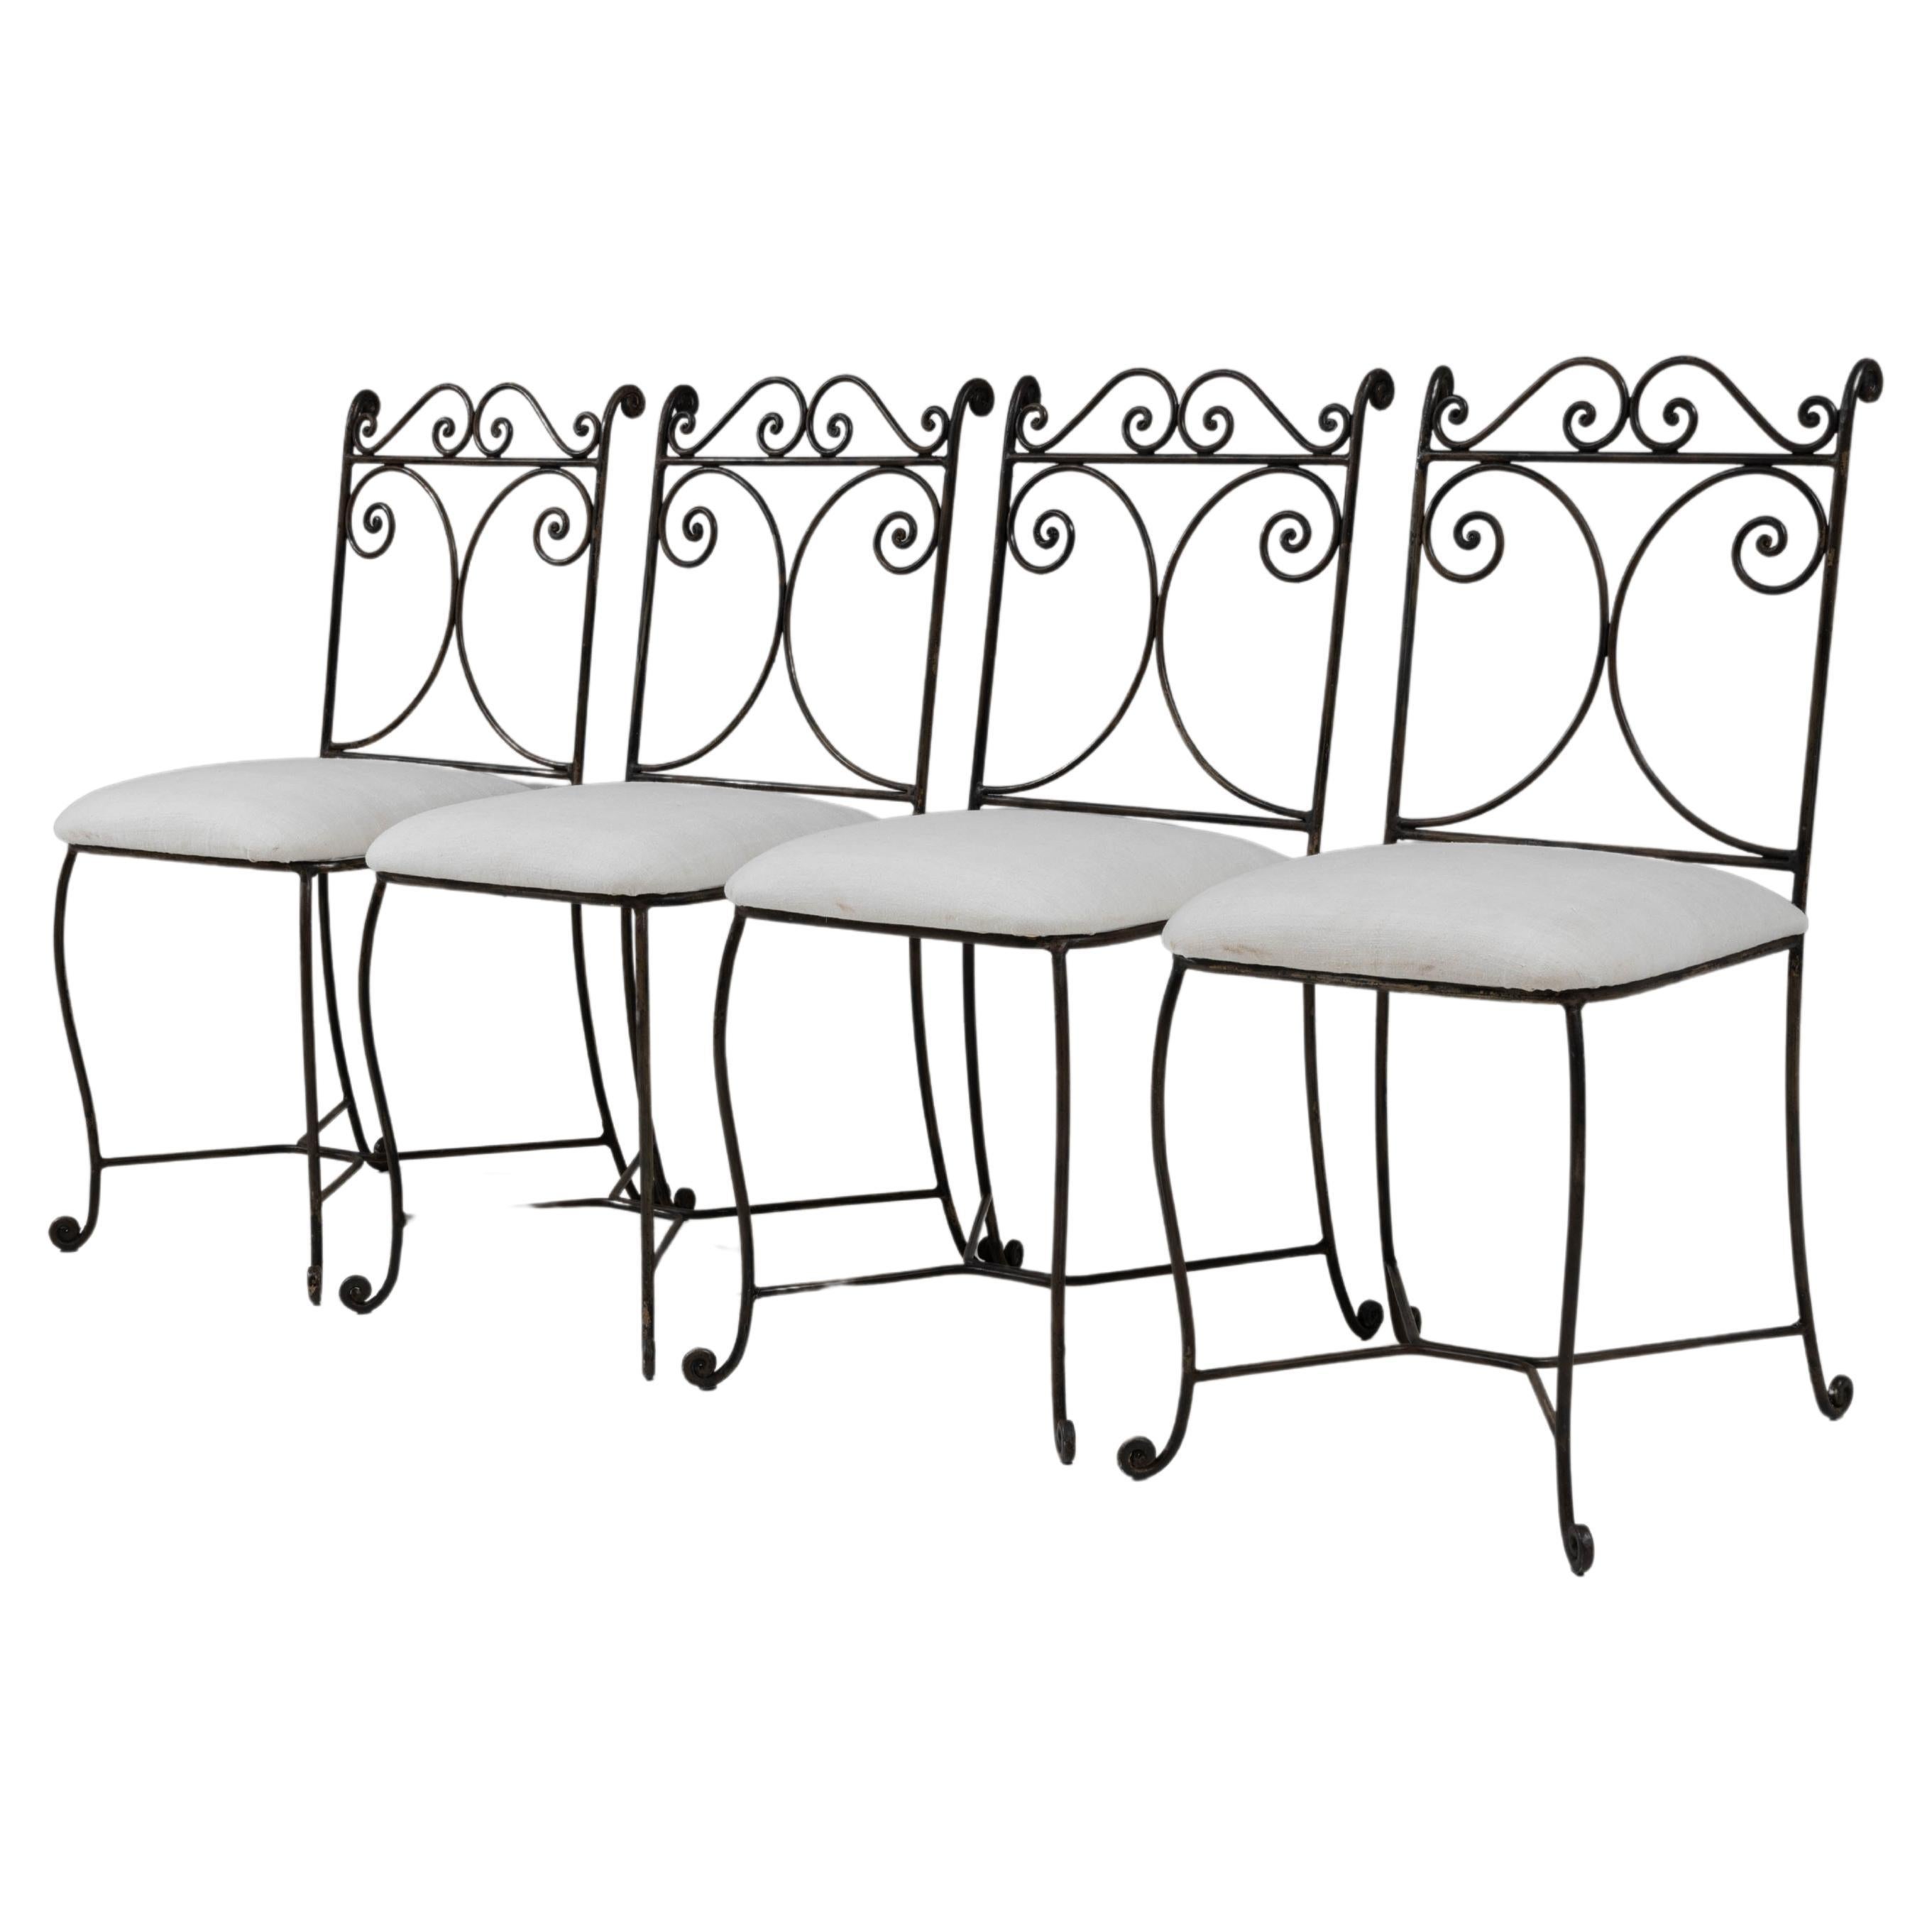 20th Century French Metal Chairs With Upholstered Seats, Set of 4 For Sale